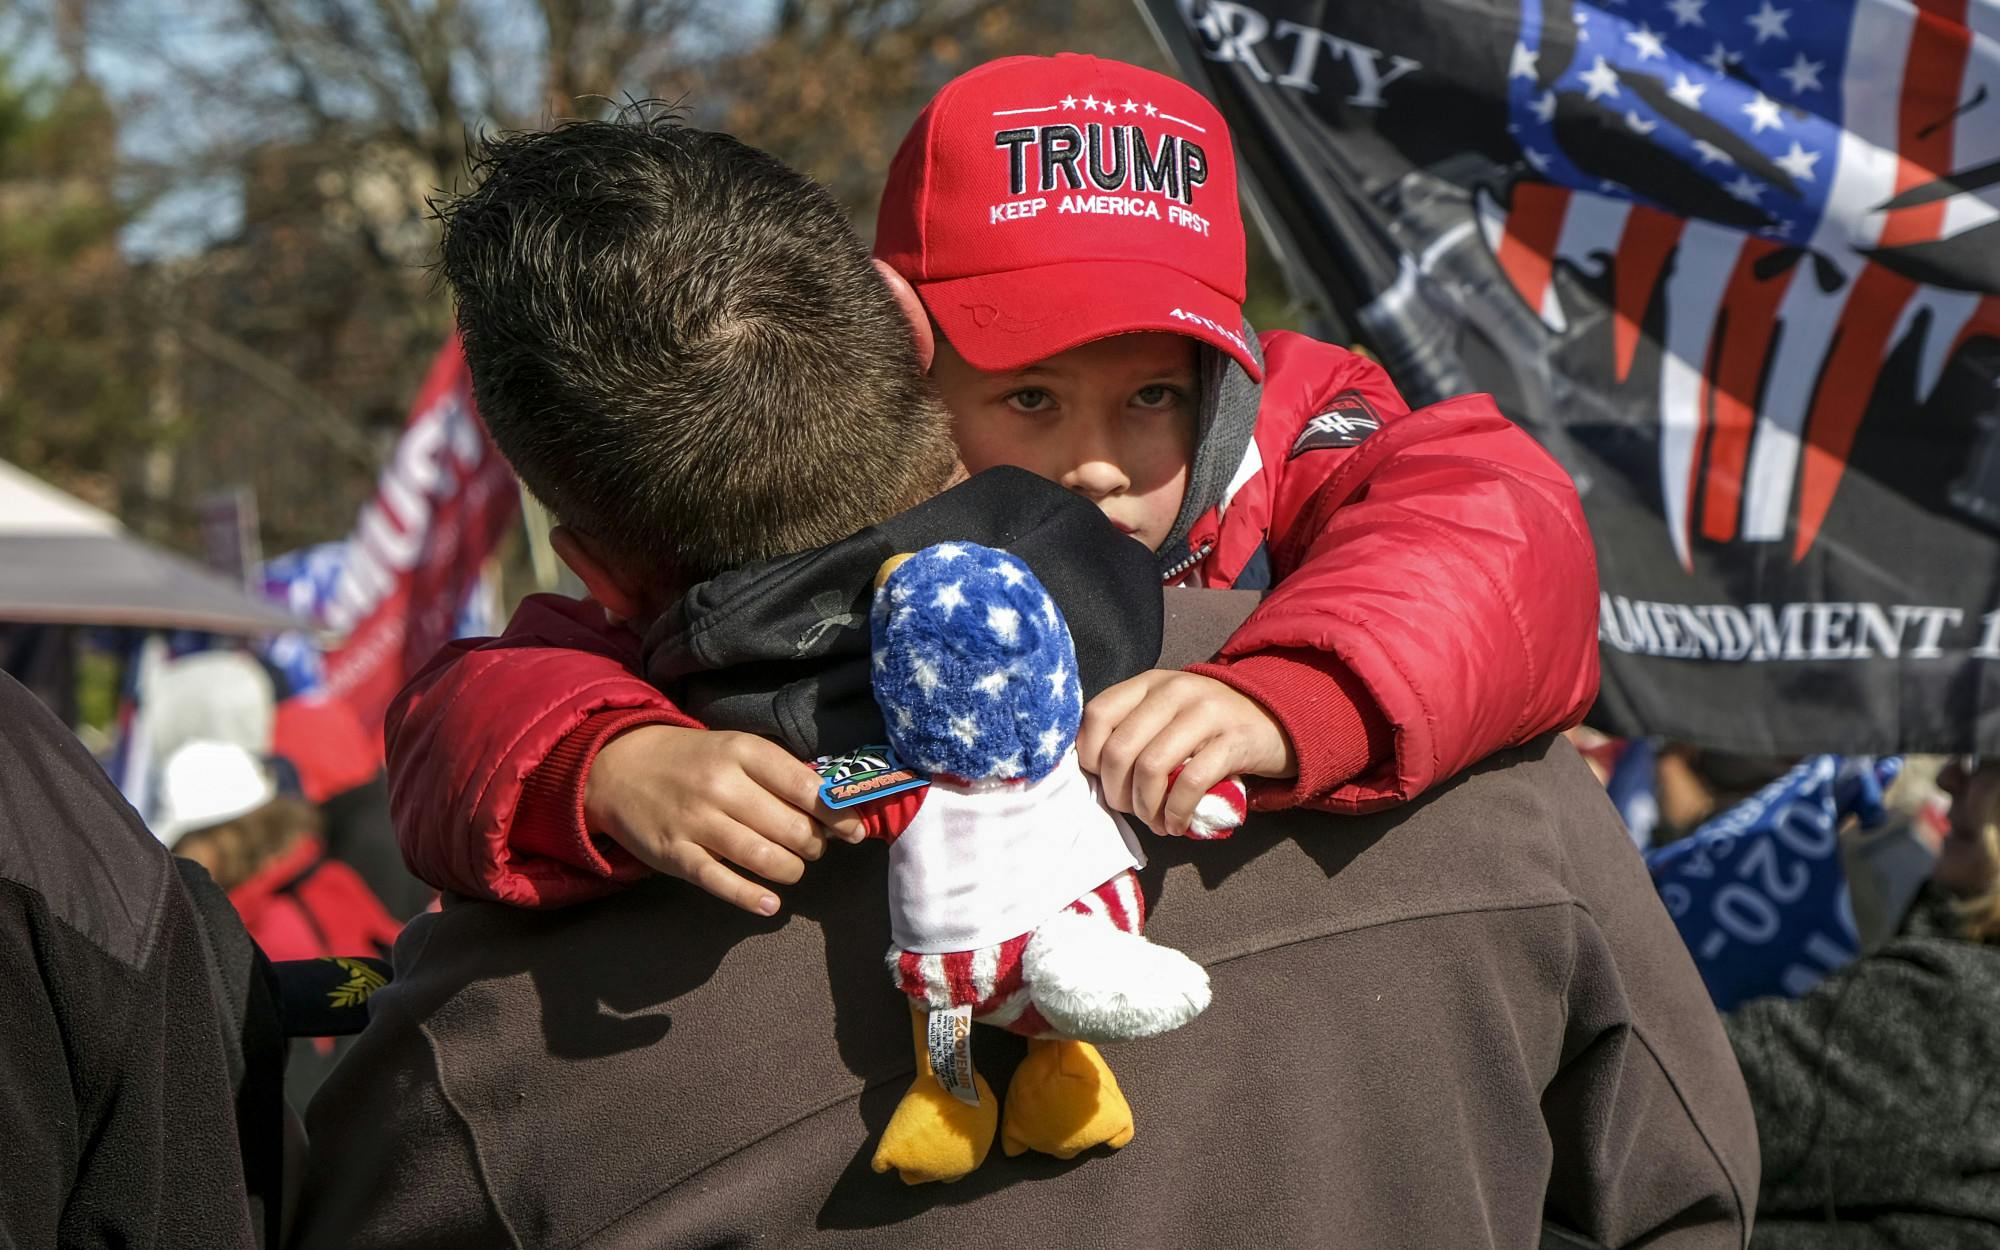 A young child wearing a Trump hat holds a stuffed animal while being carried by another person.